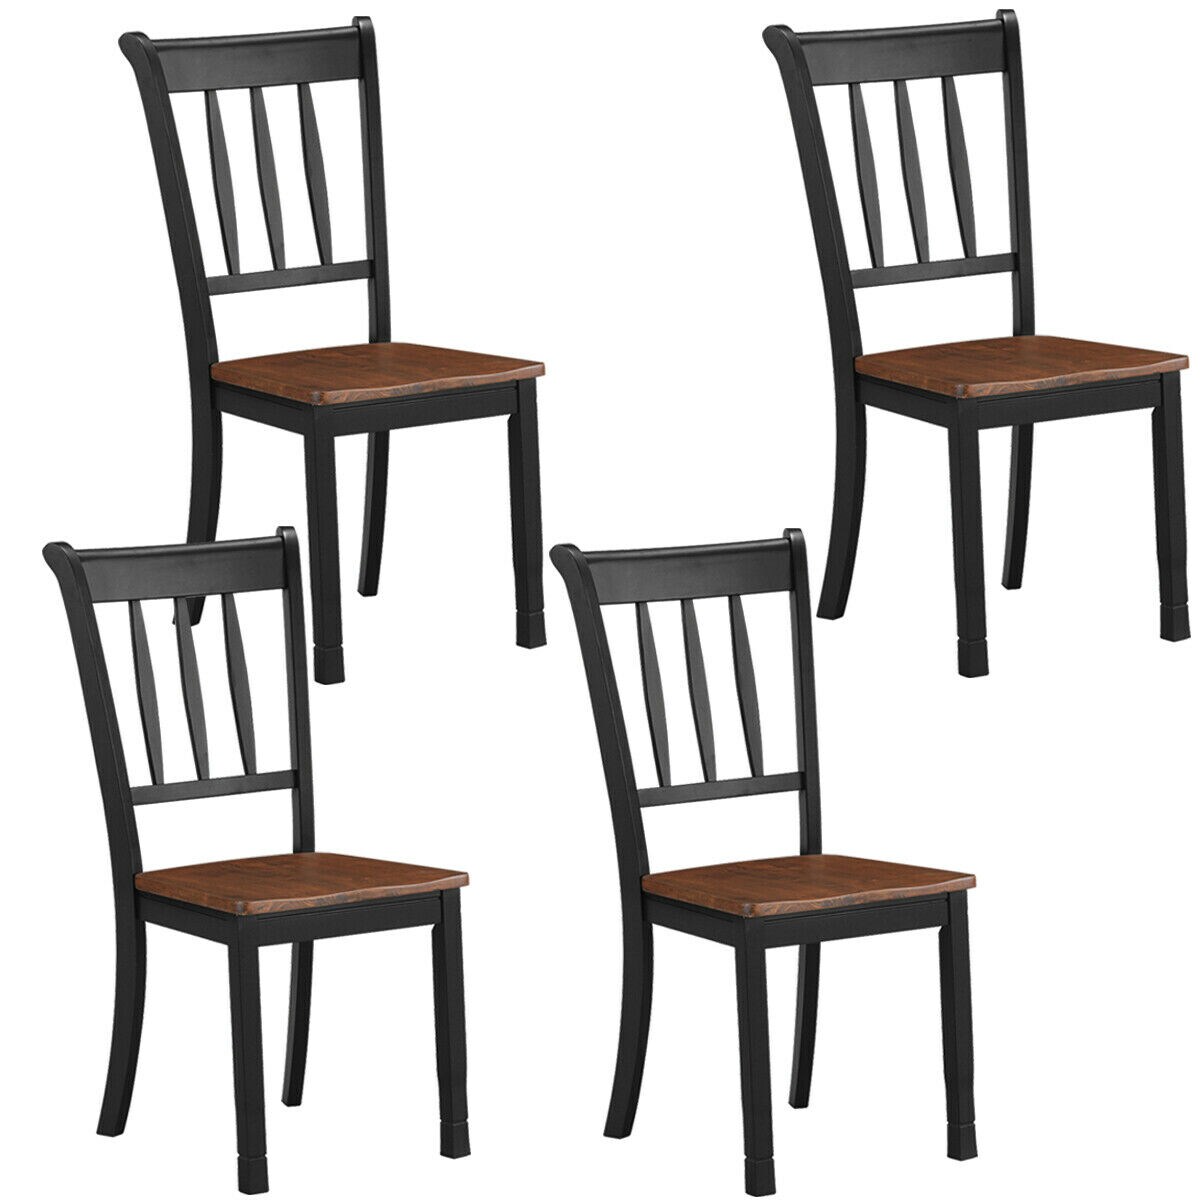 Gymax 4PCS Wooden Dining Side Chair High Back Armless Home Furniture Black